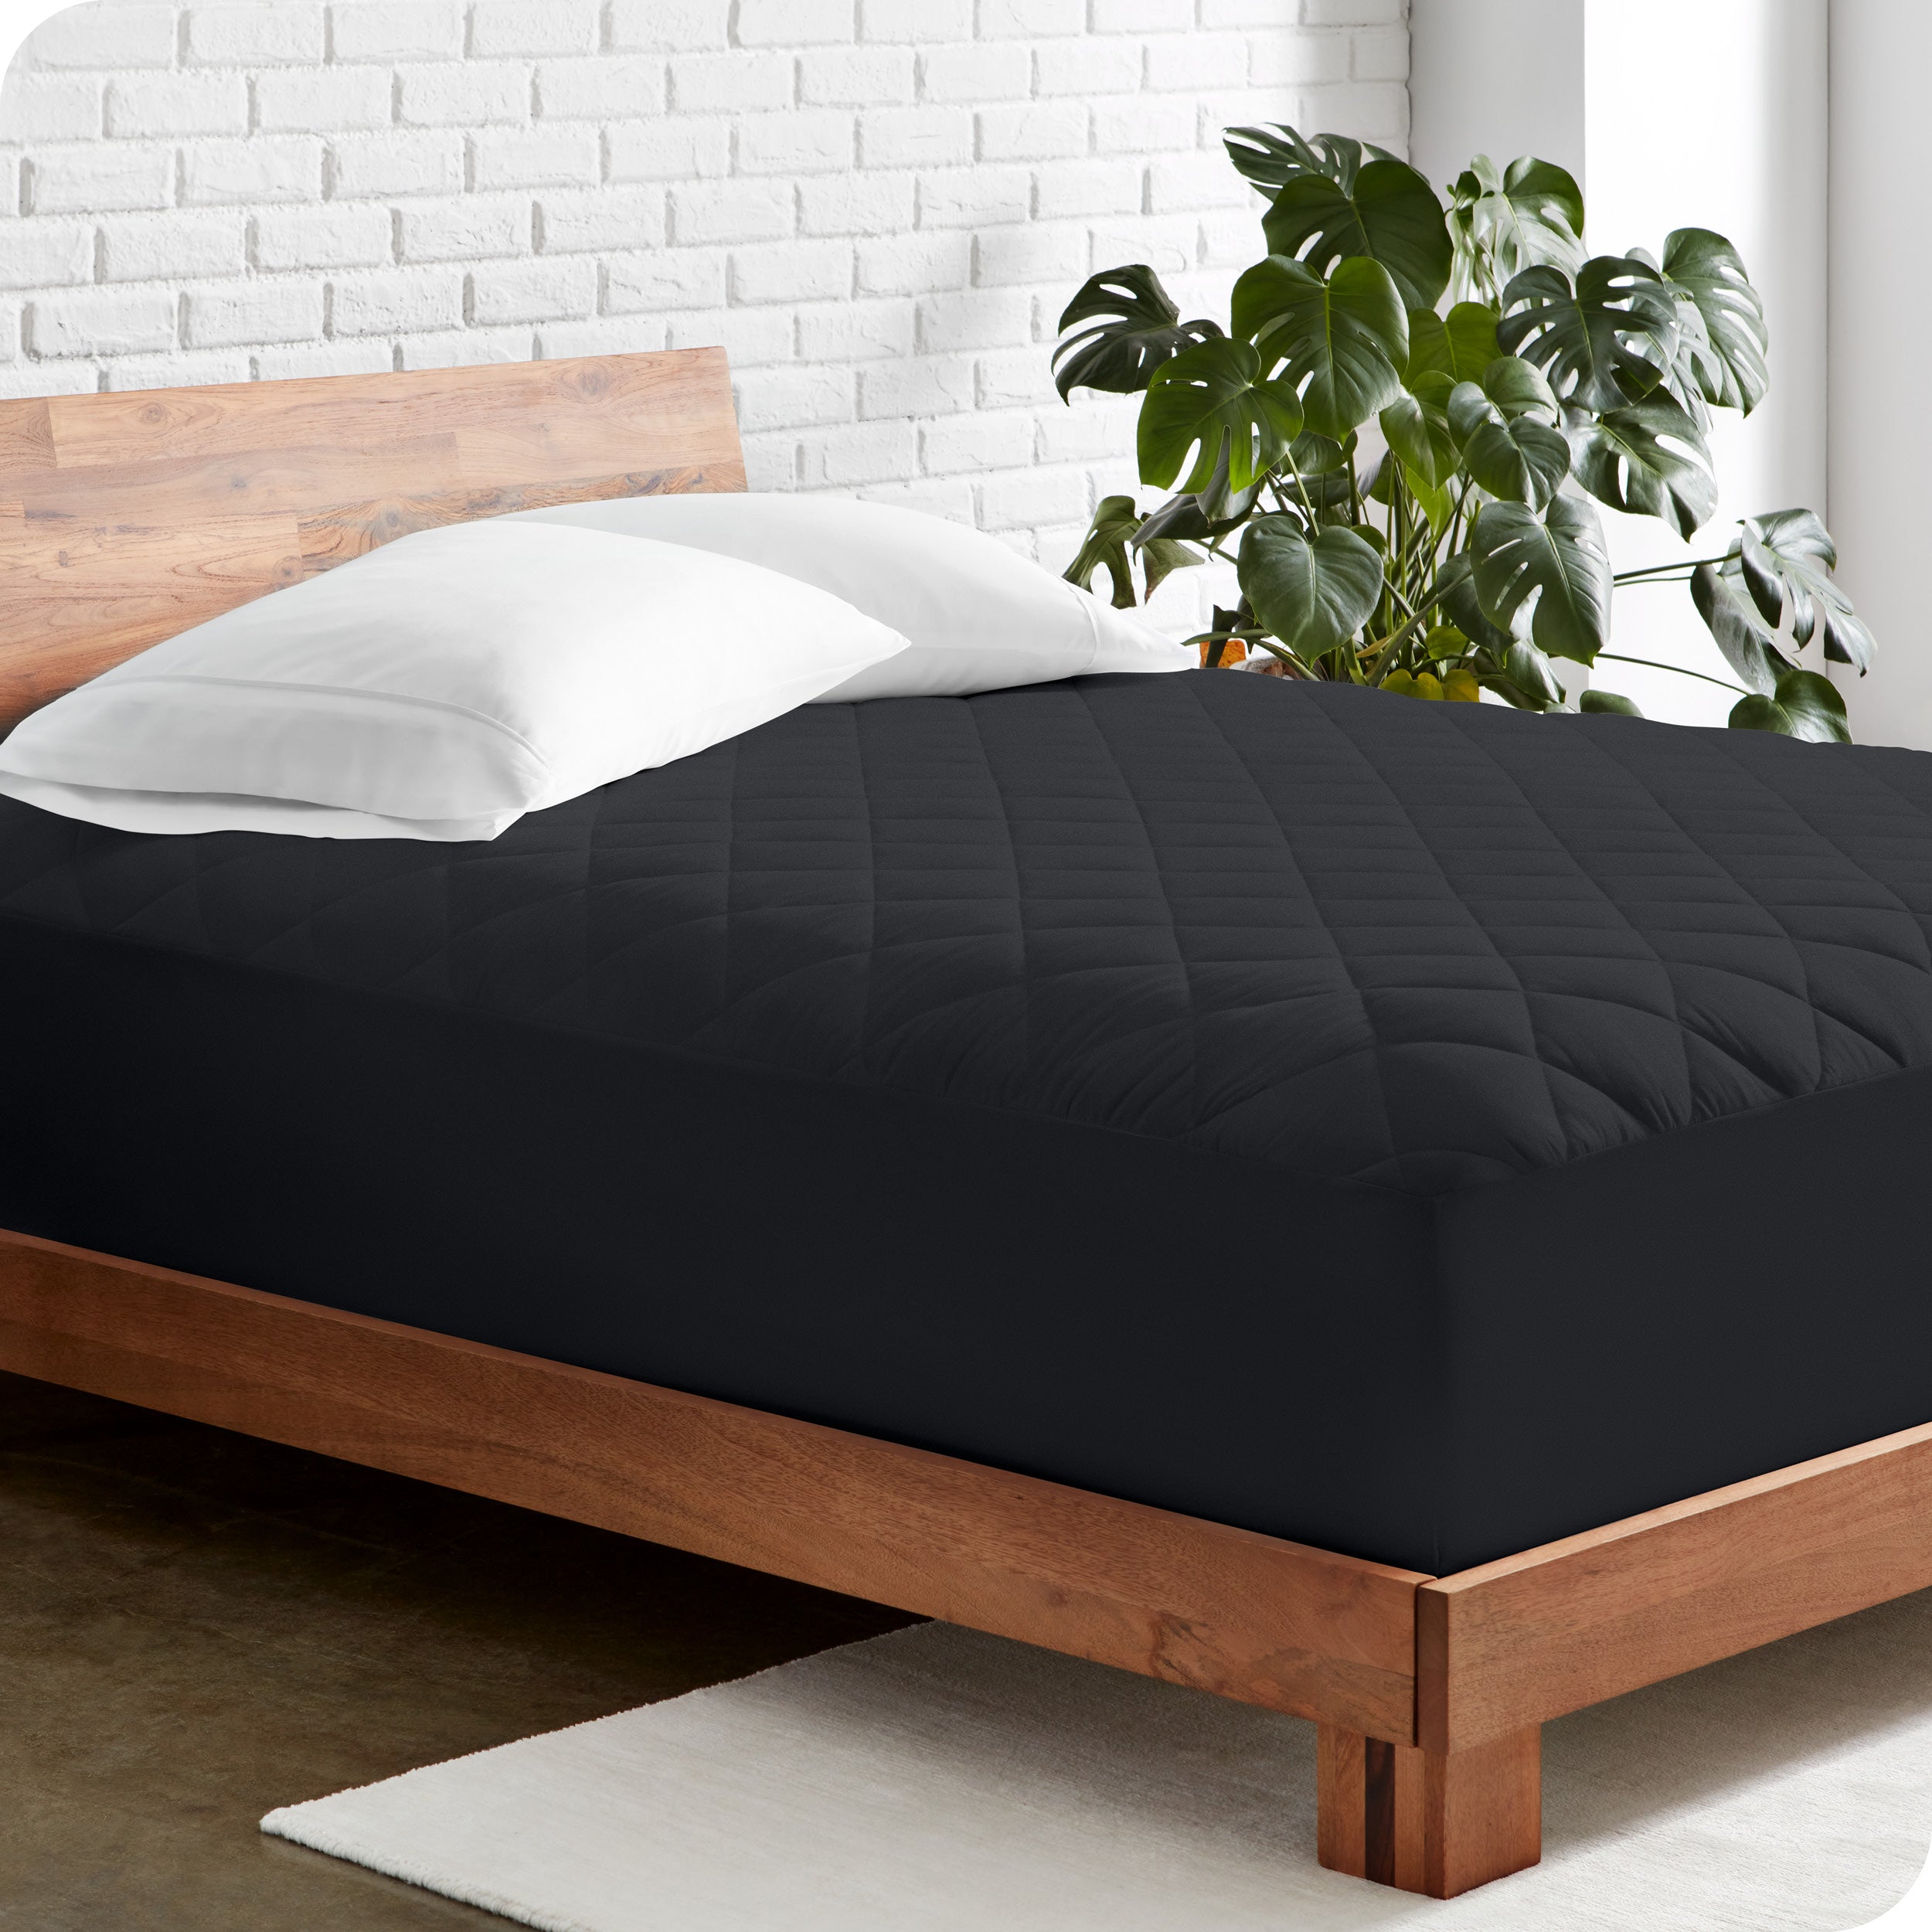 A diagonal view of a bed frame with mattress on it. There is a mattress pad on the mattress and 2 pillows on top of the mattress pad. A large plant is next to the bed. 